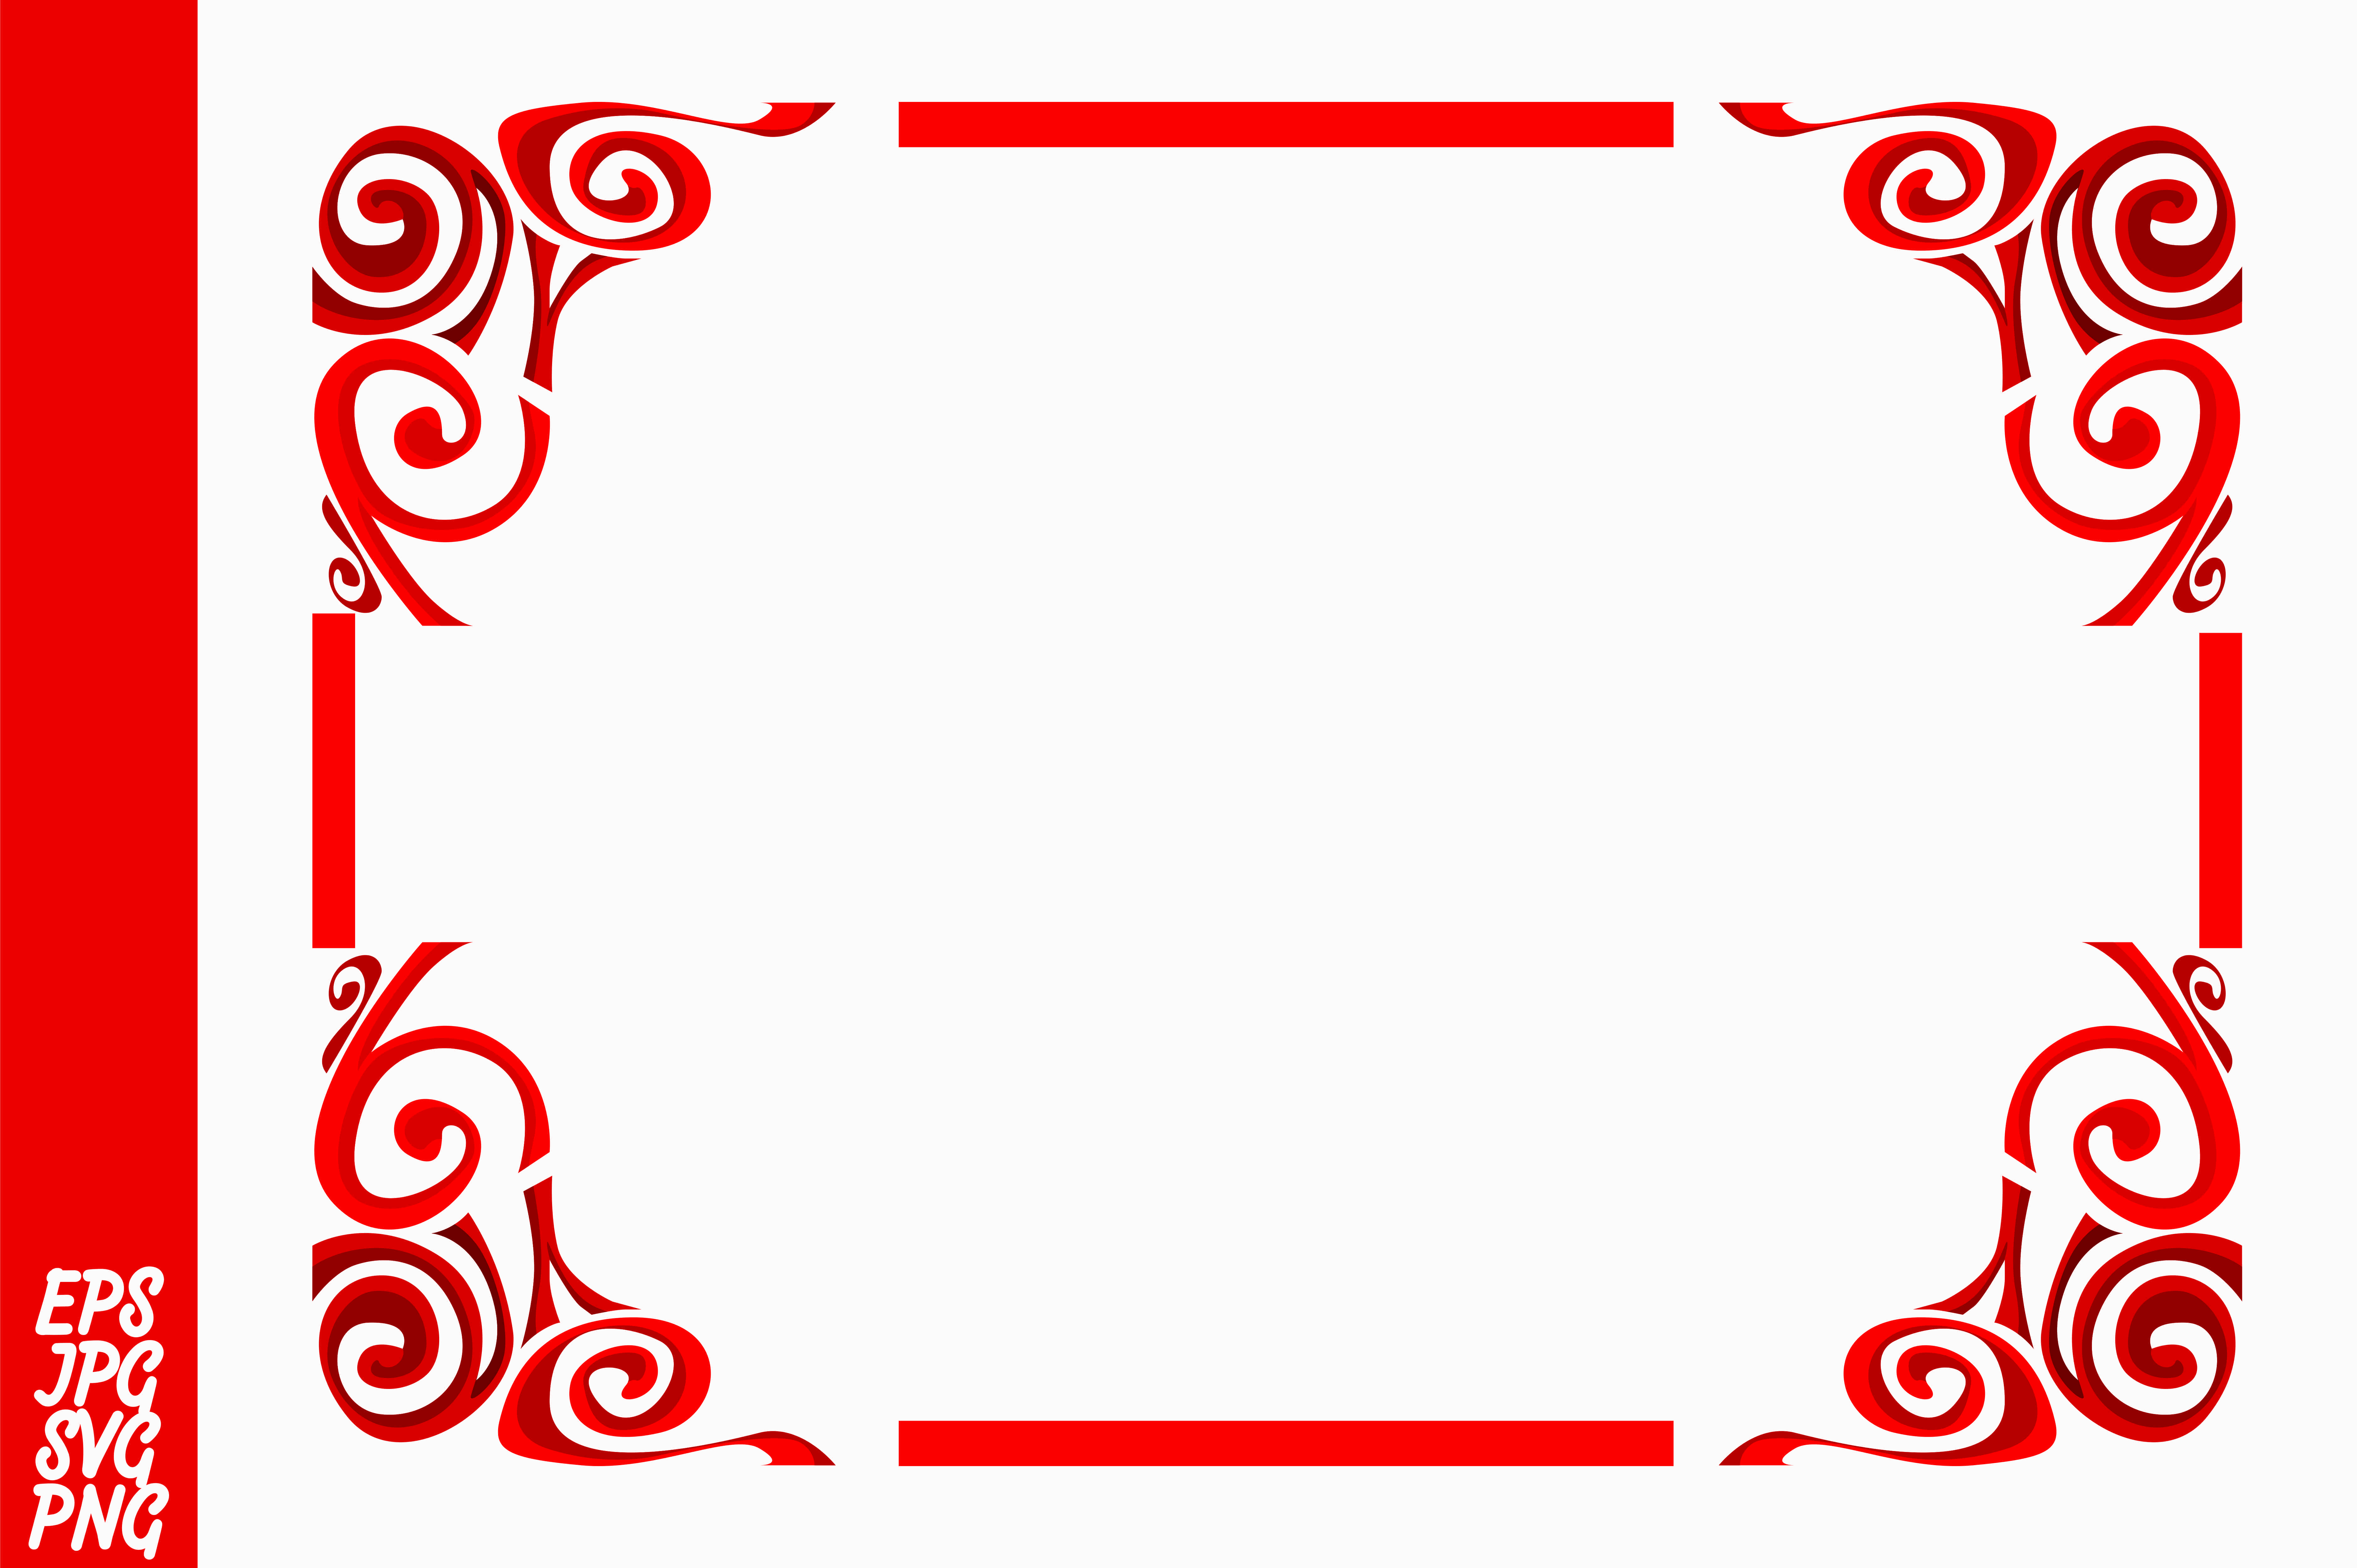 Download Rectangle Border Vector at Vectorified.com | Collection of ...